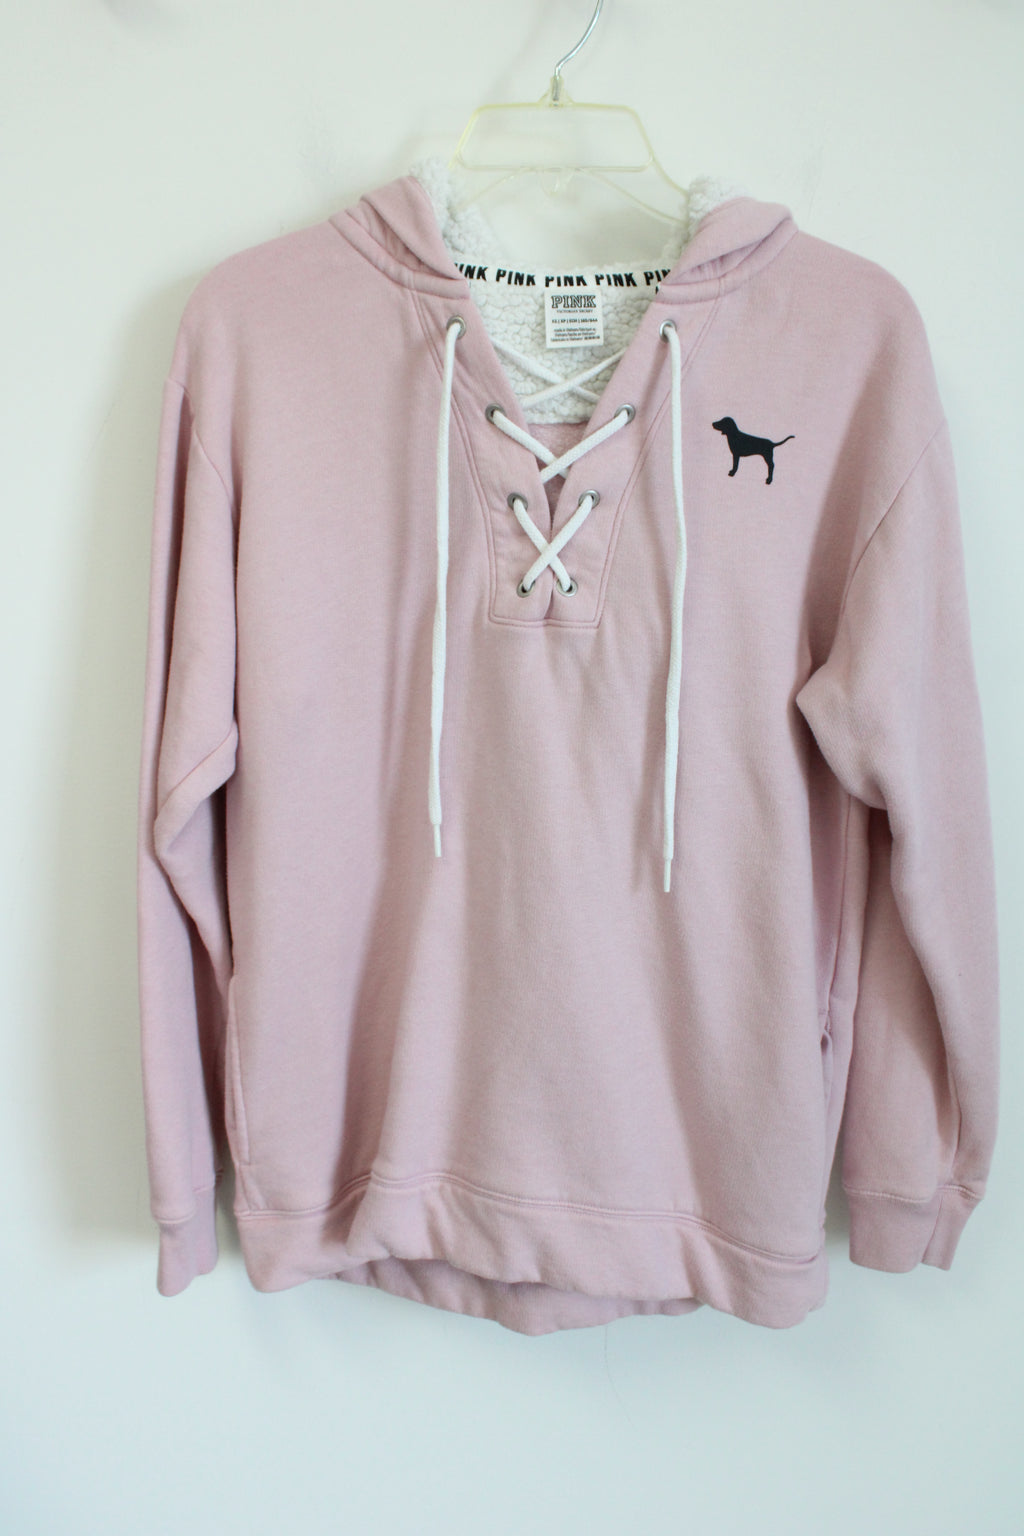 Victoria's Secret Pink Lace Up Sherpa Lined Hoodie | XS